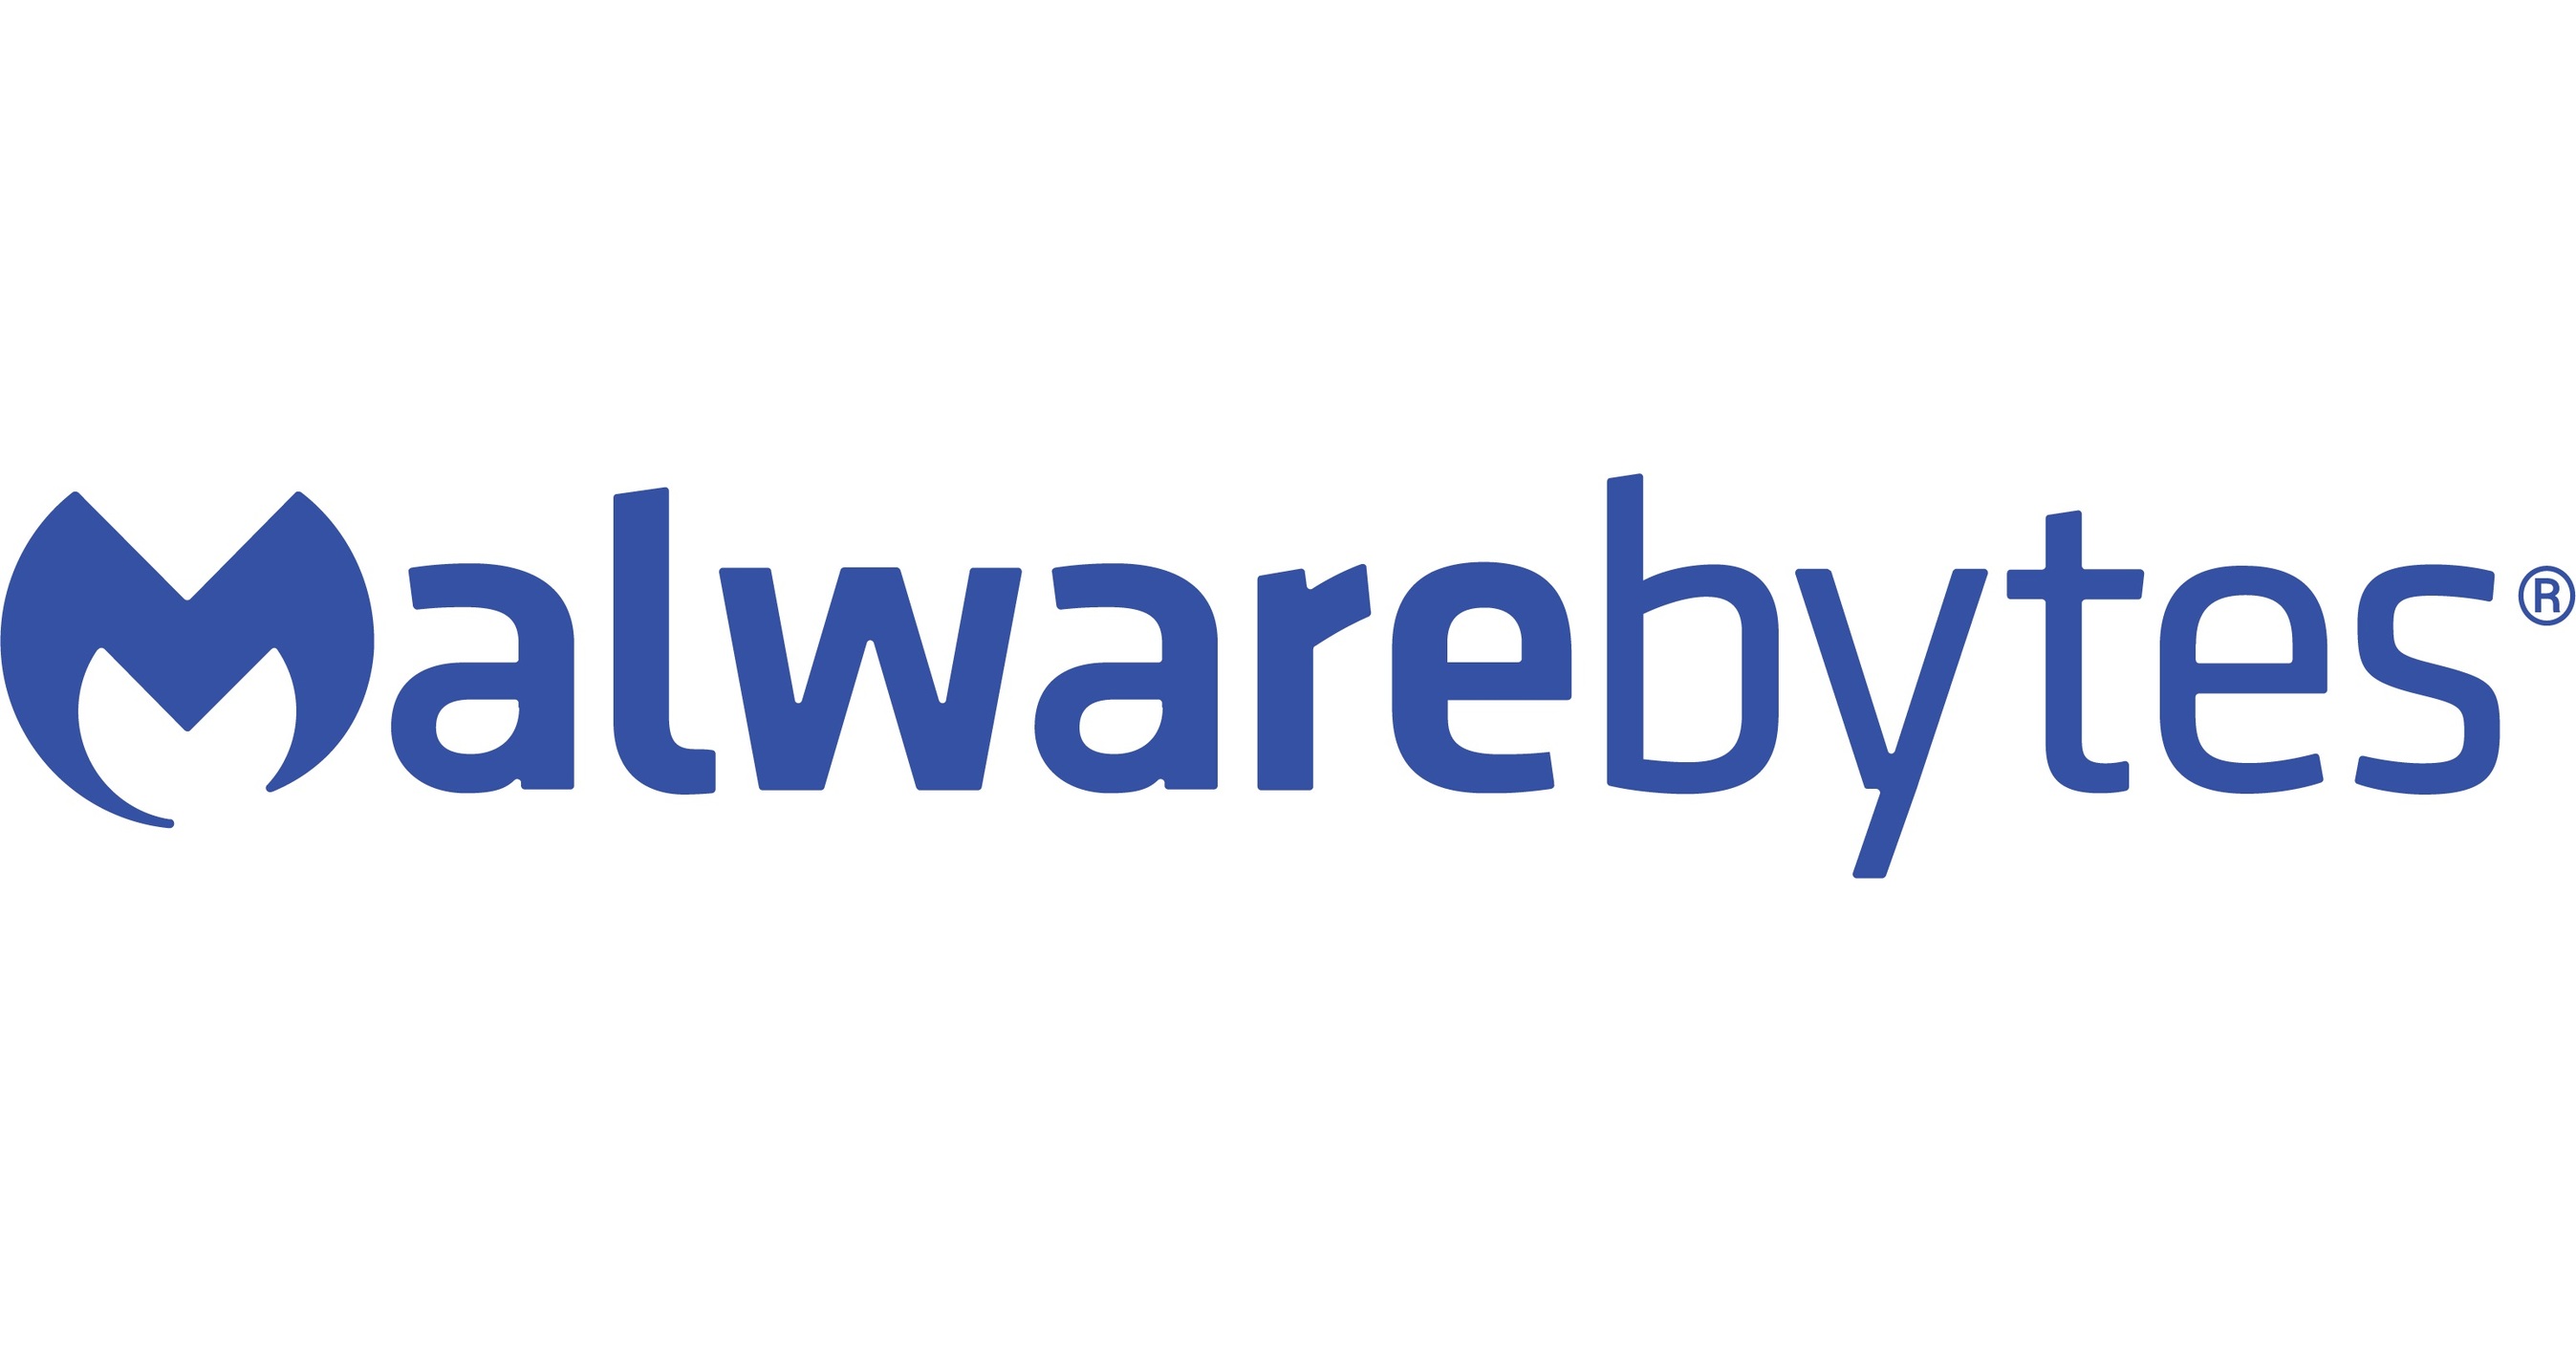 Malwarebytes Launches Managed Detection and Response Solution to Reinforce Security Operations of Resource-Limited Organizations USA